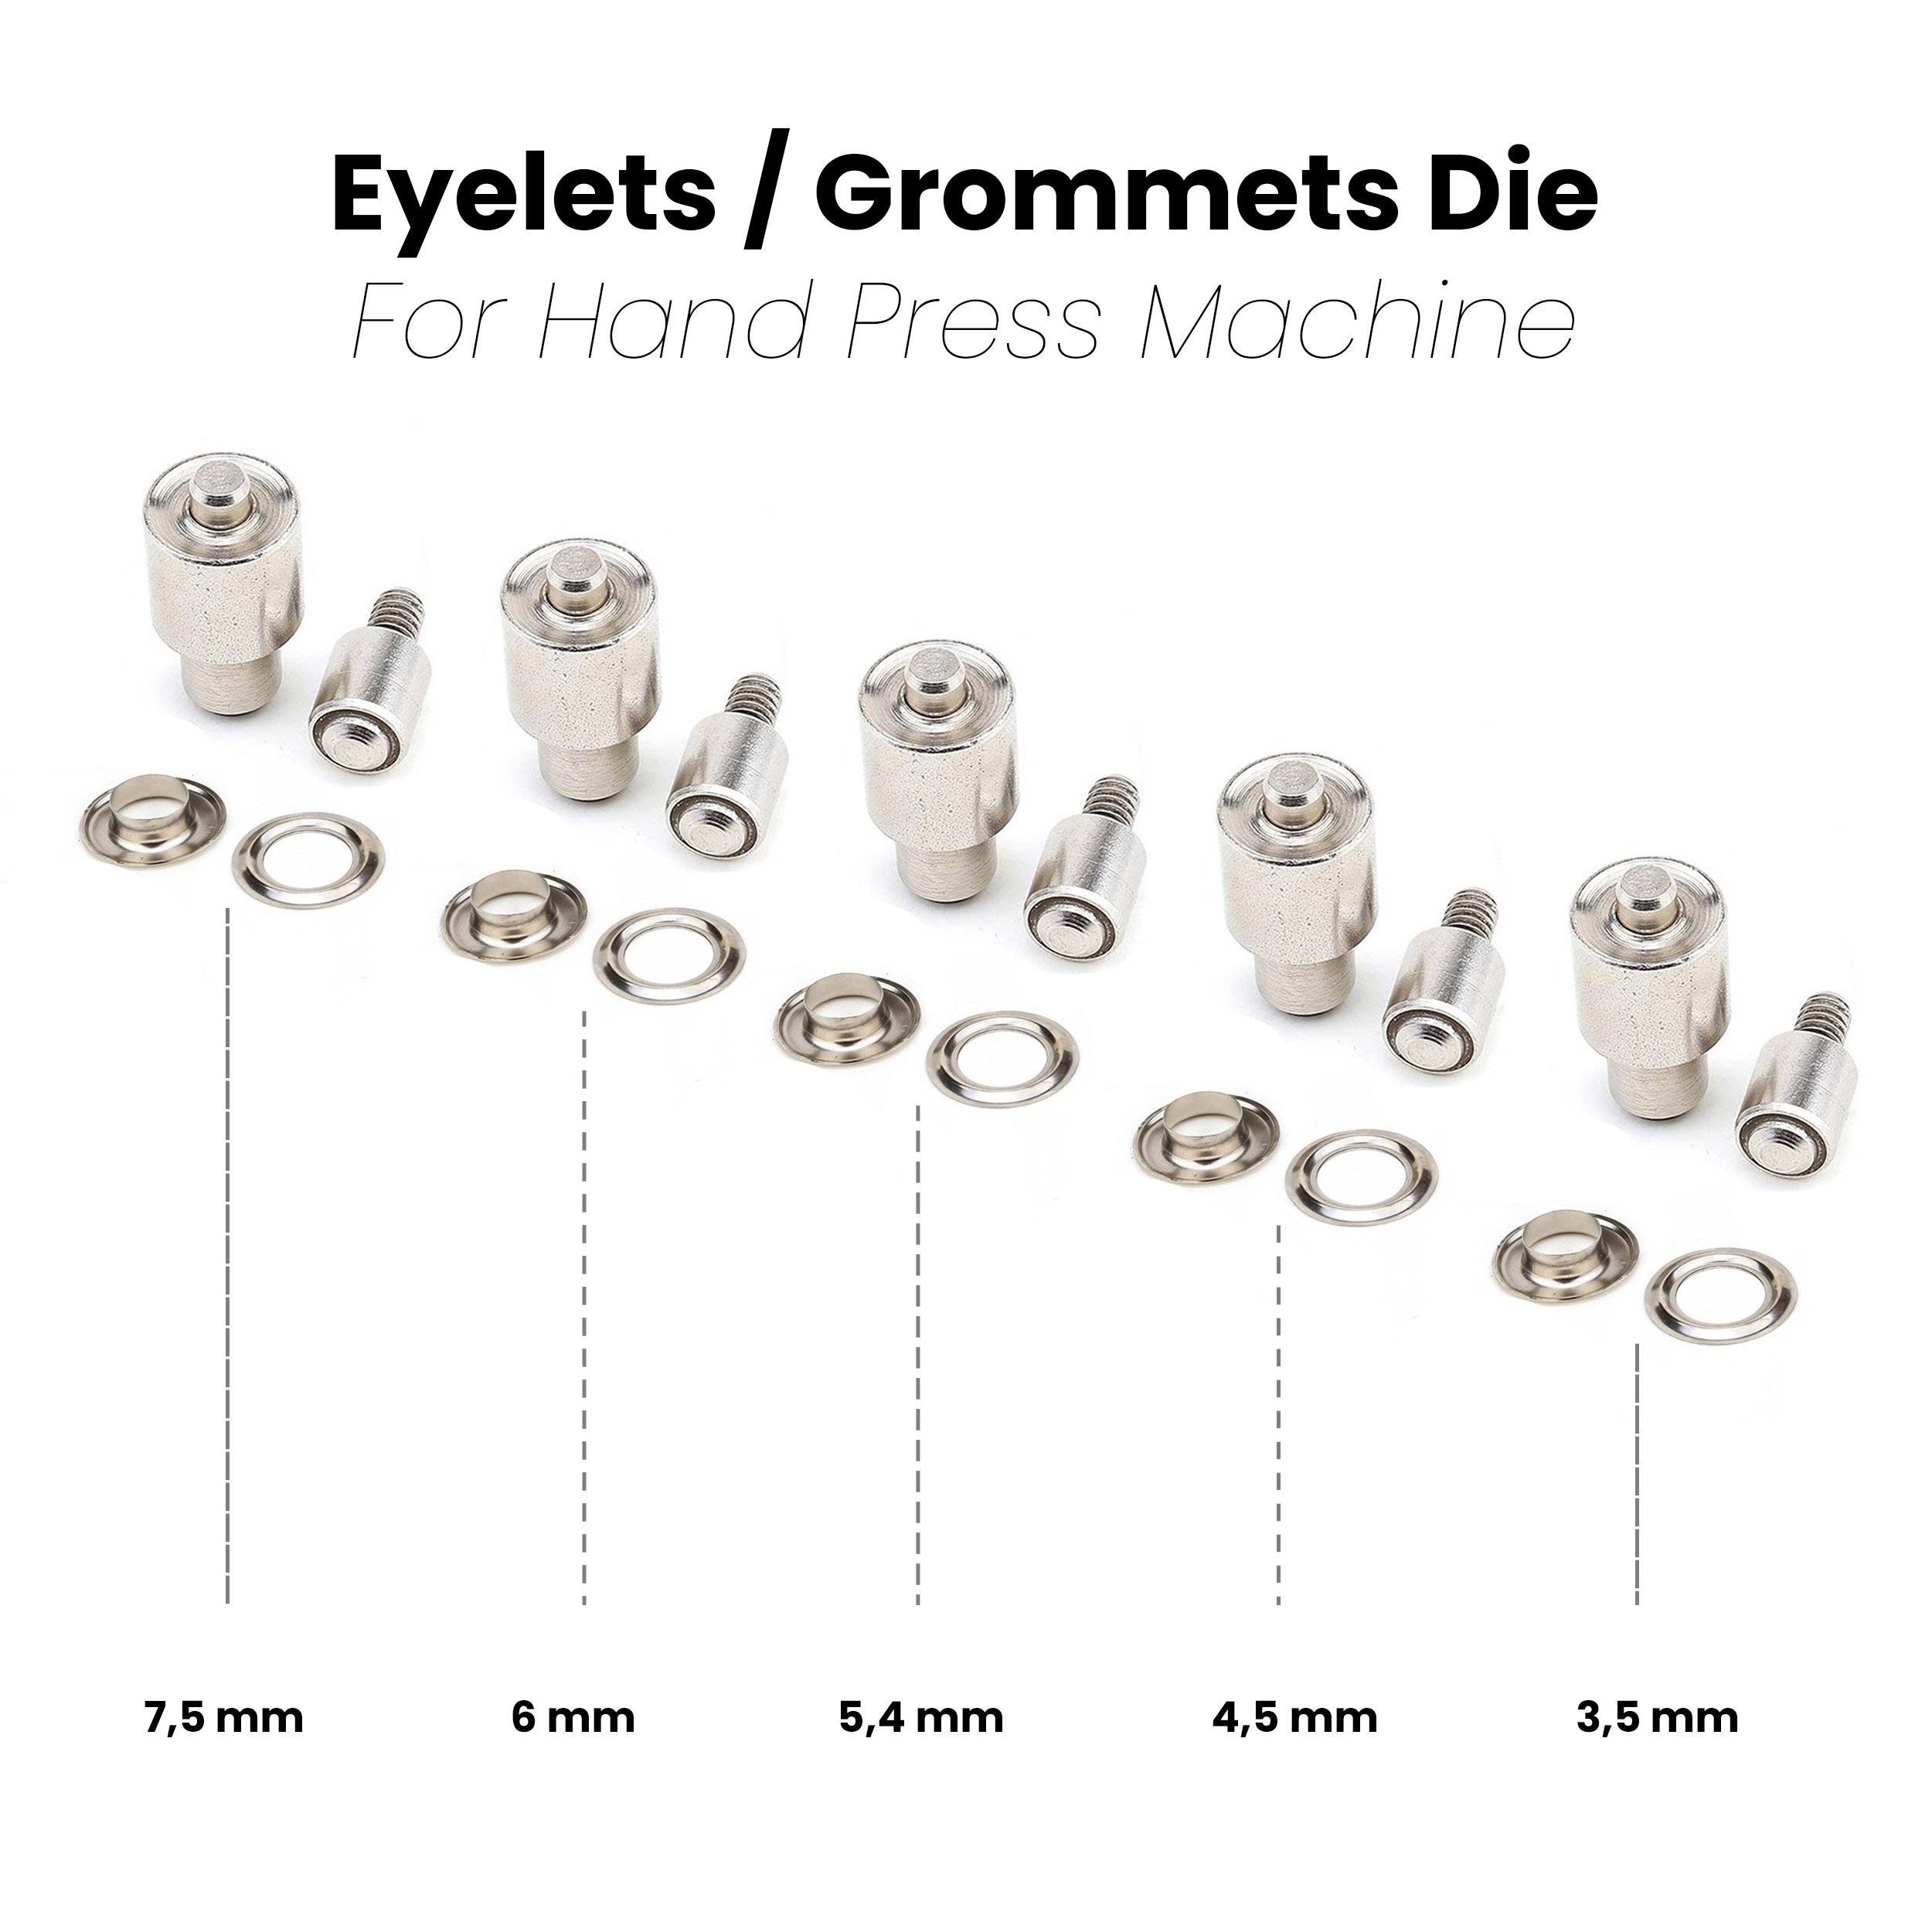 Hole Punch Dies for Hand Press Machine 1 Mm to 17 Mm Hole Punching to  Leathers, Papers, Fabrics for Setting Rivet, Grommets, Snaps 